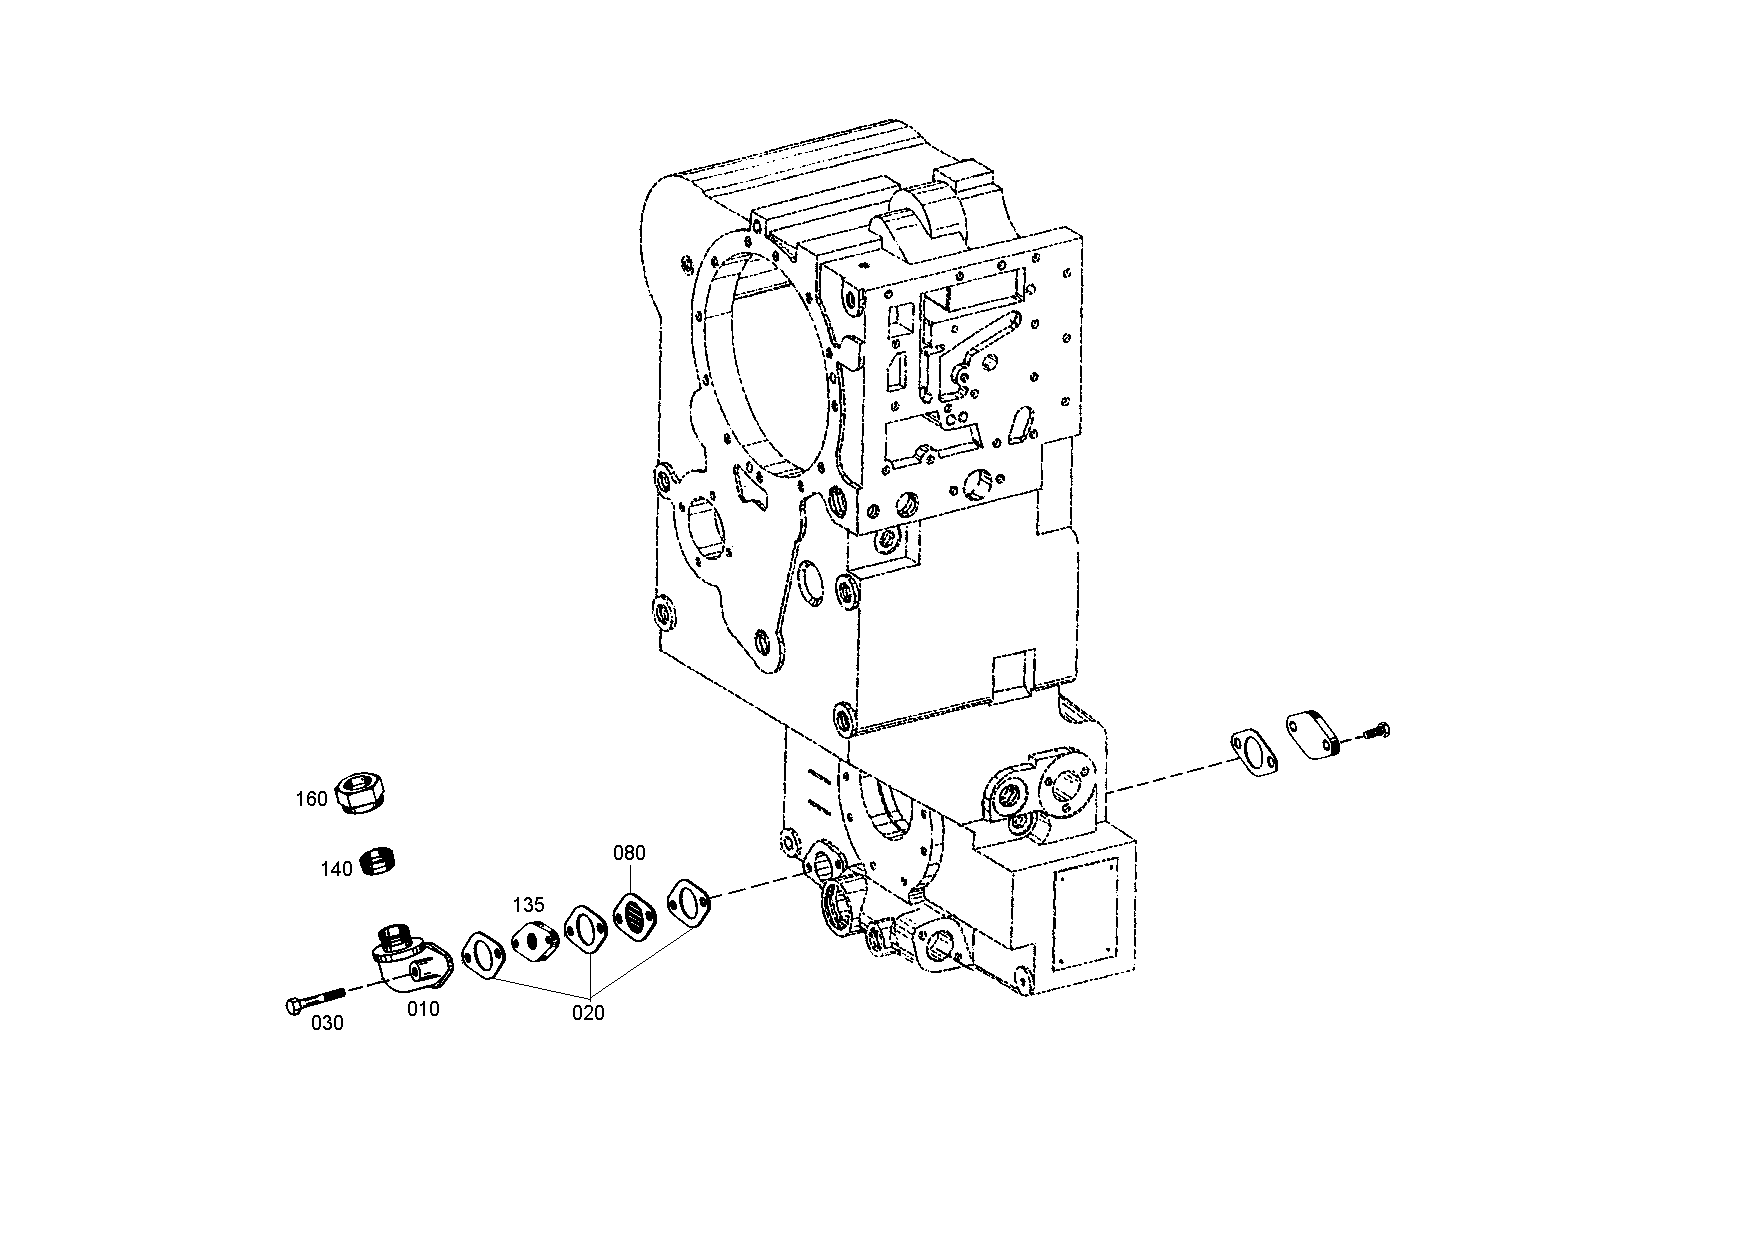 drawing for PPM 8051910 - BAFFLE PLATE (figure 2)